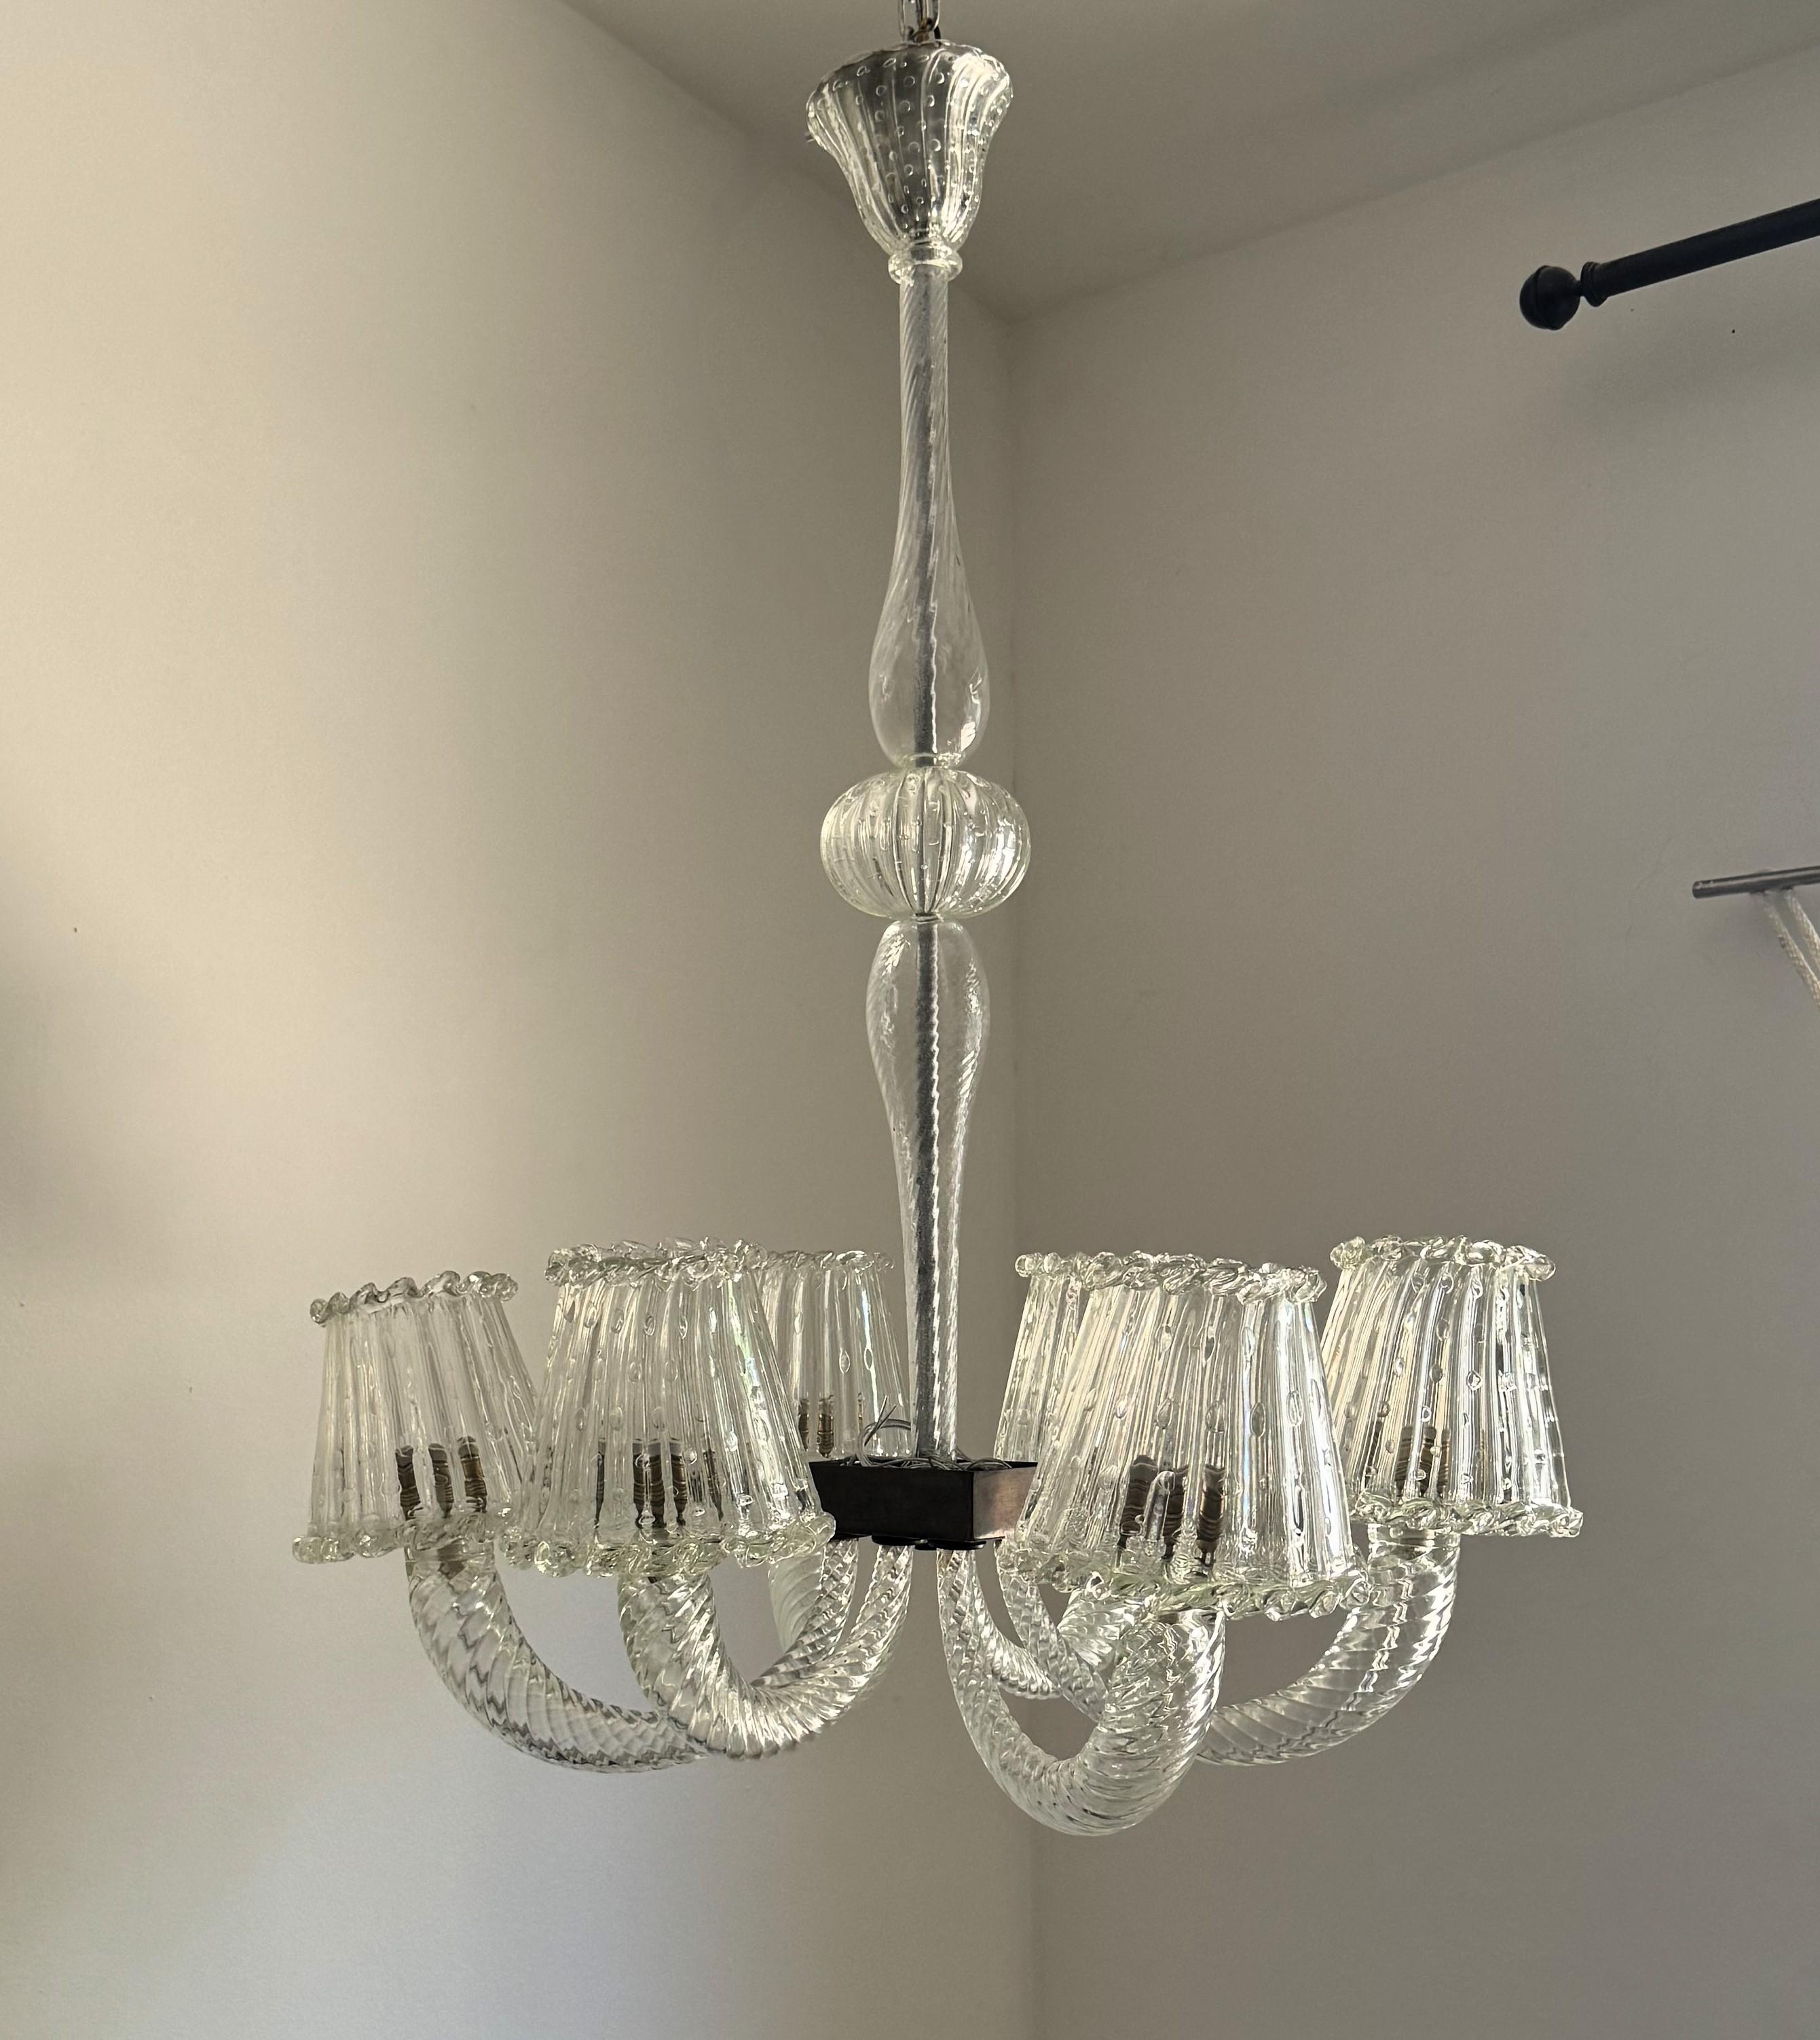 Large Murano glass  chandelier consisting of 6 lights and made in clear glass and some pieces with some controlled air bubble decoration.
Manufactured between 1920 and 1940 in the island of Murano Italy, this design and techniques are very